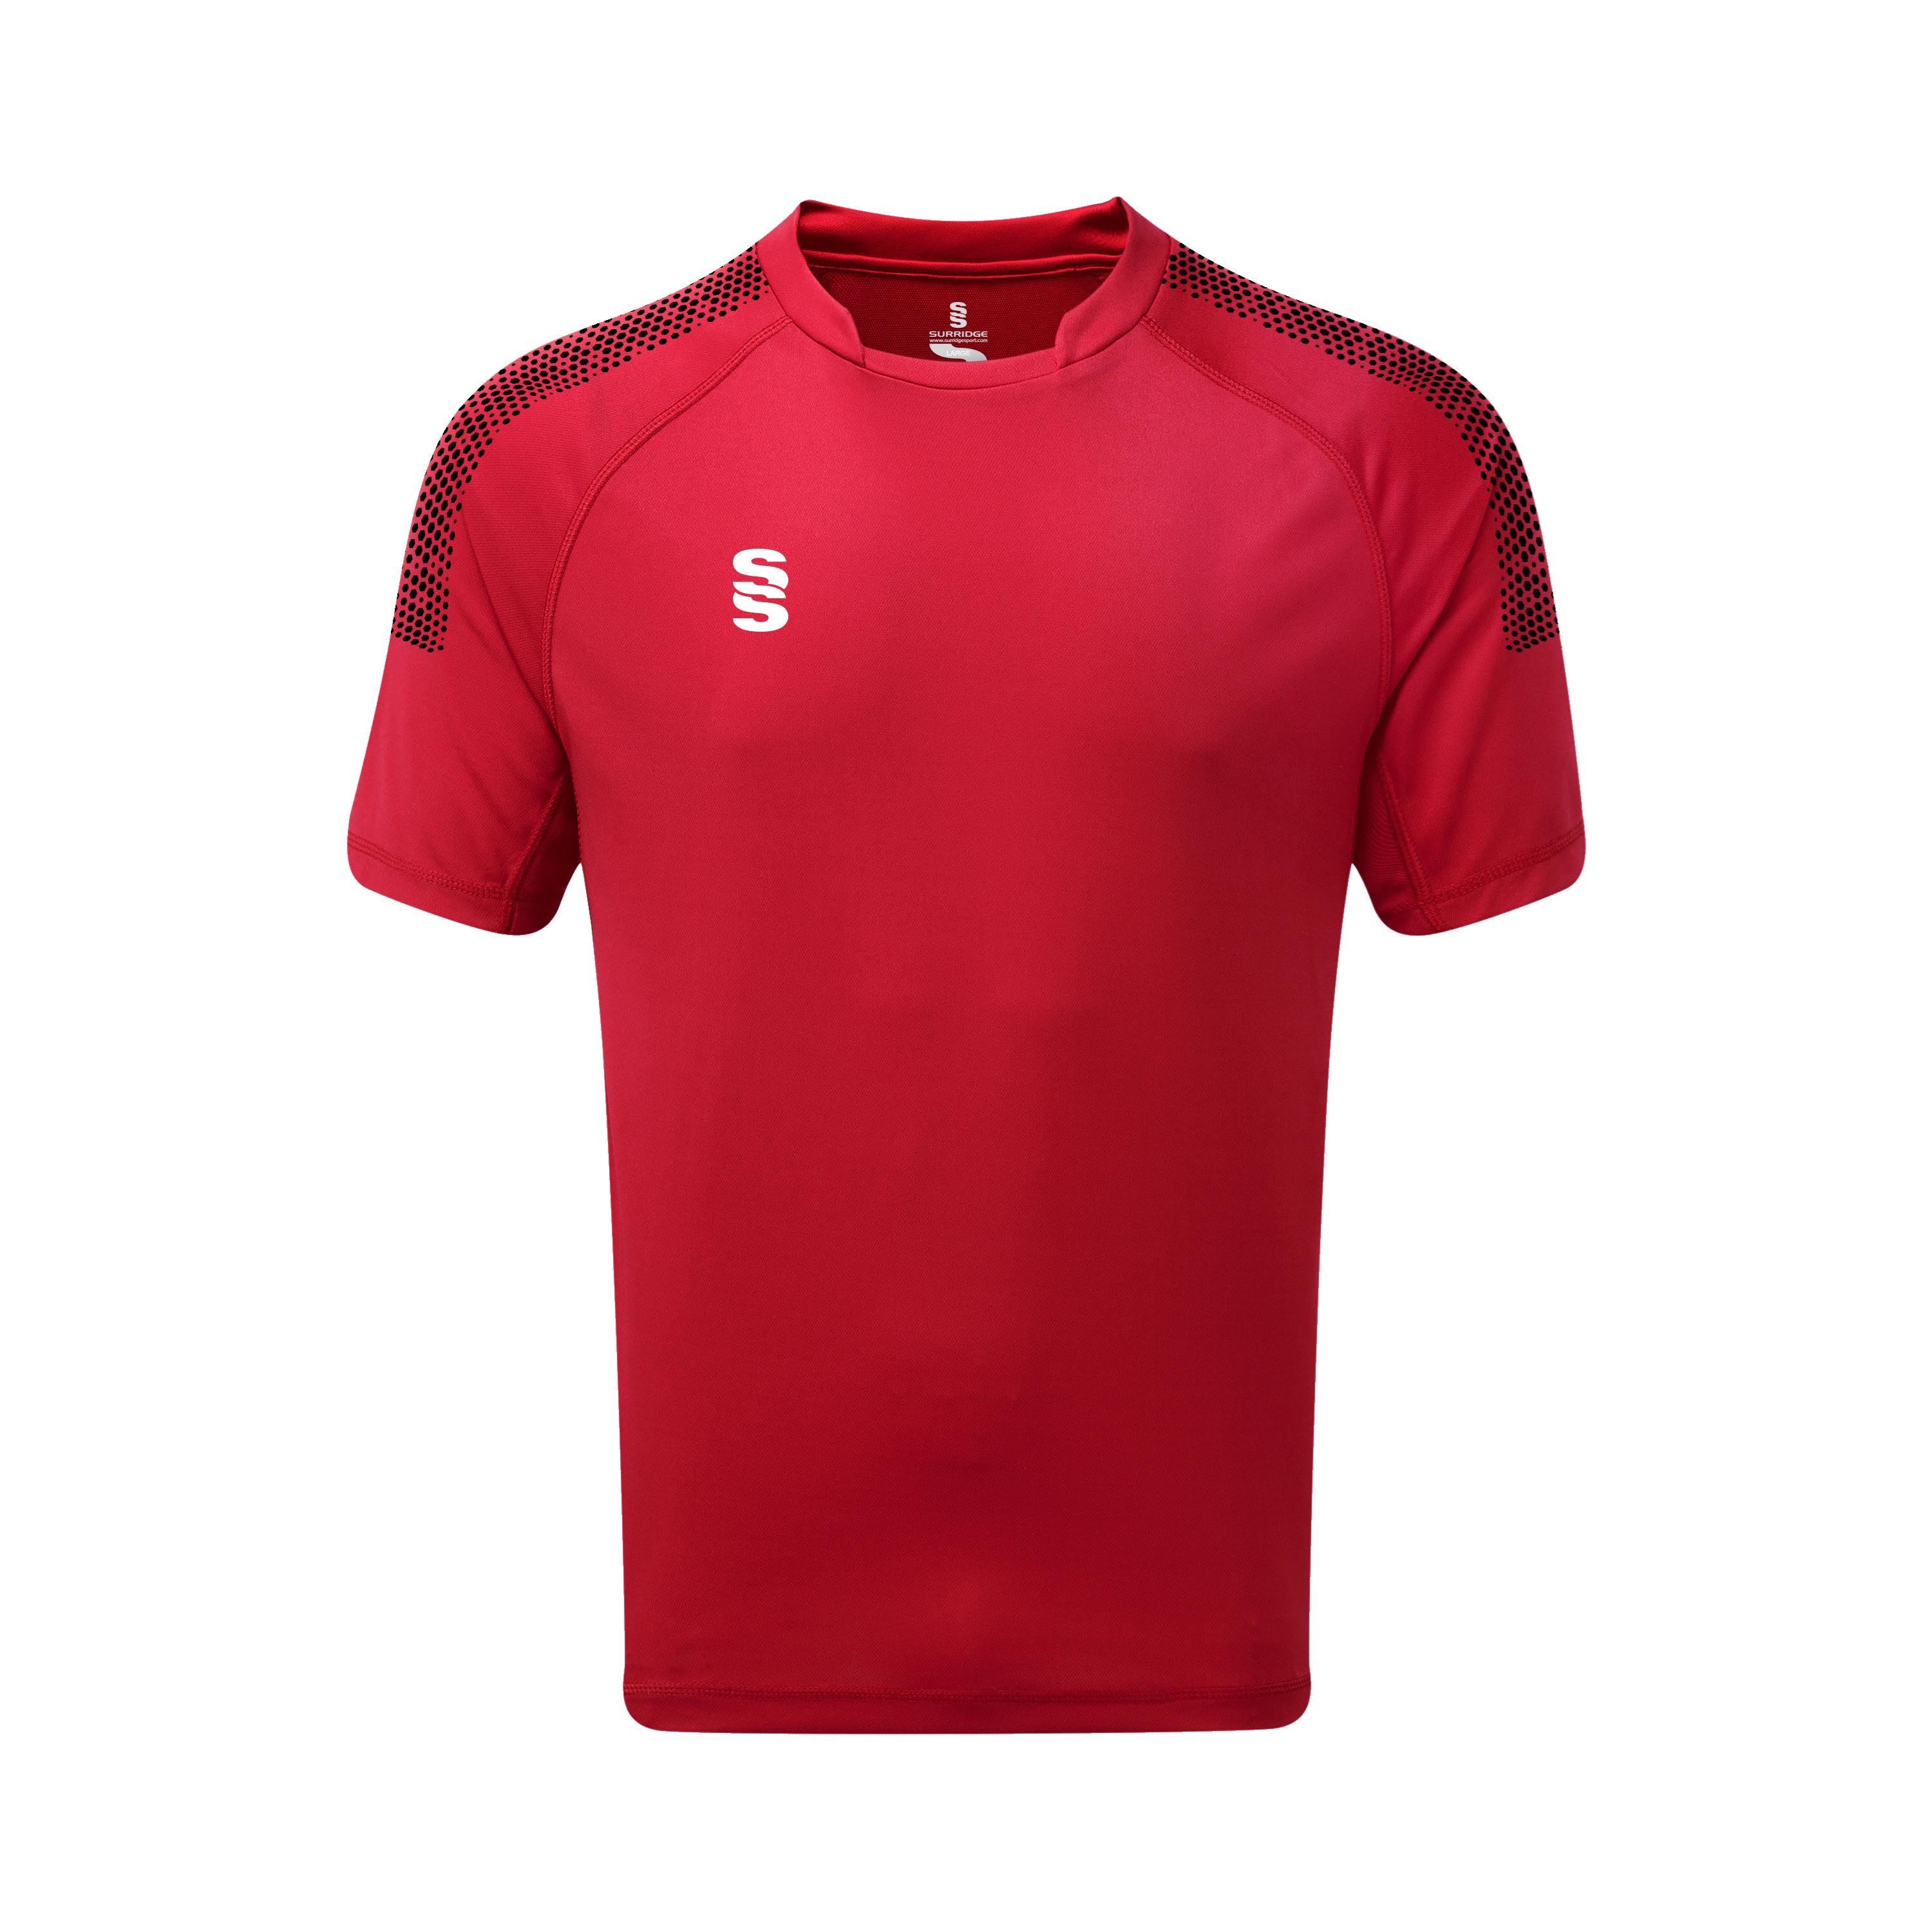 Dual T20 Shirt_red-blk